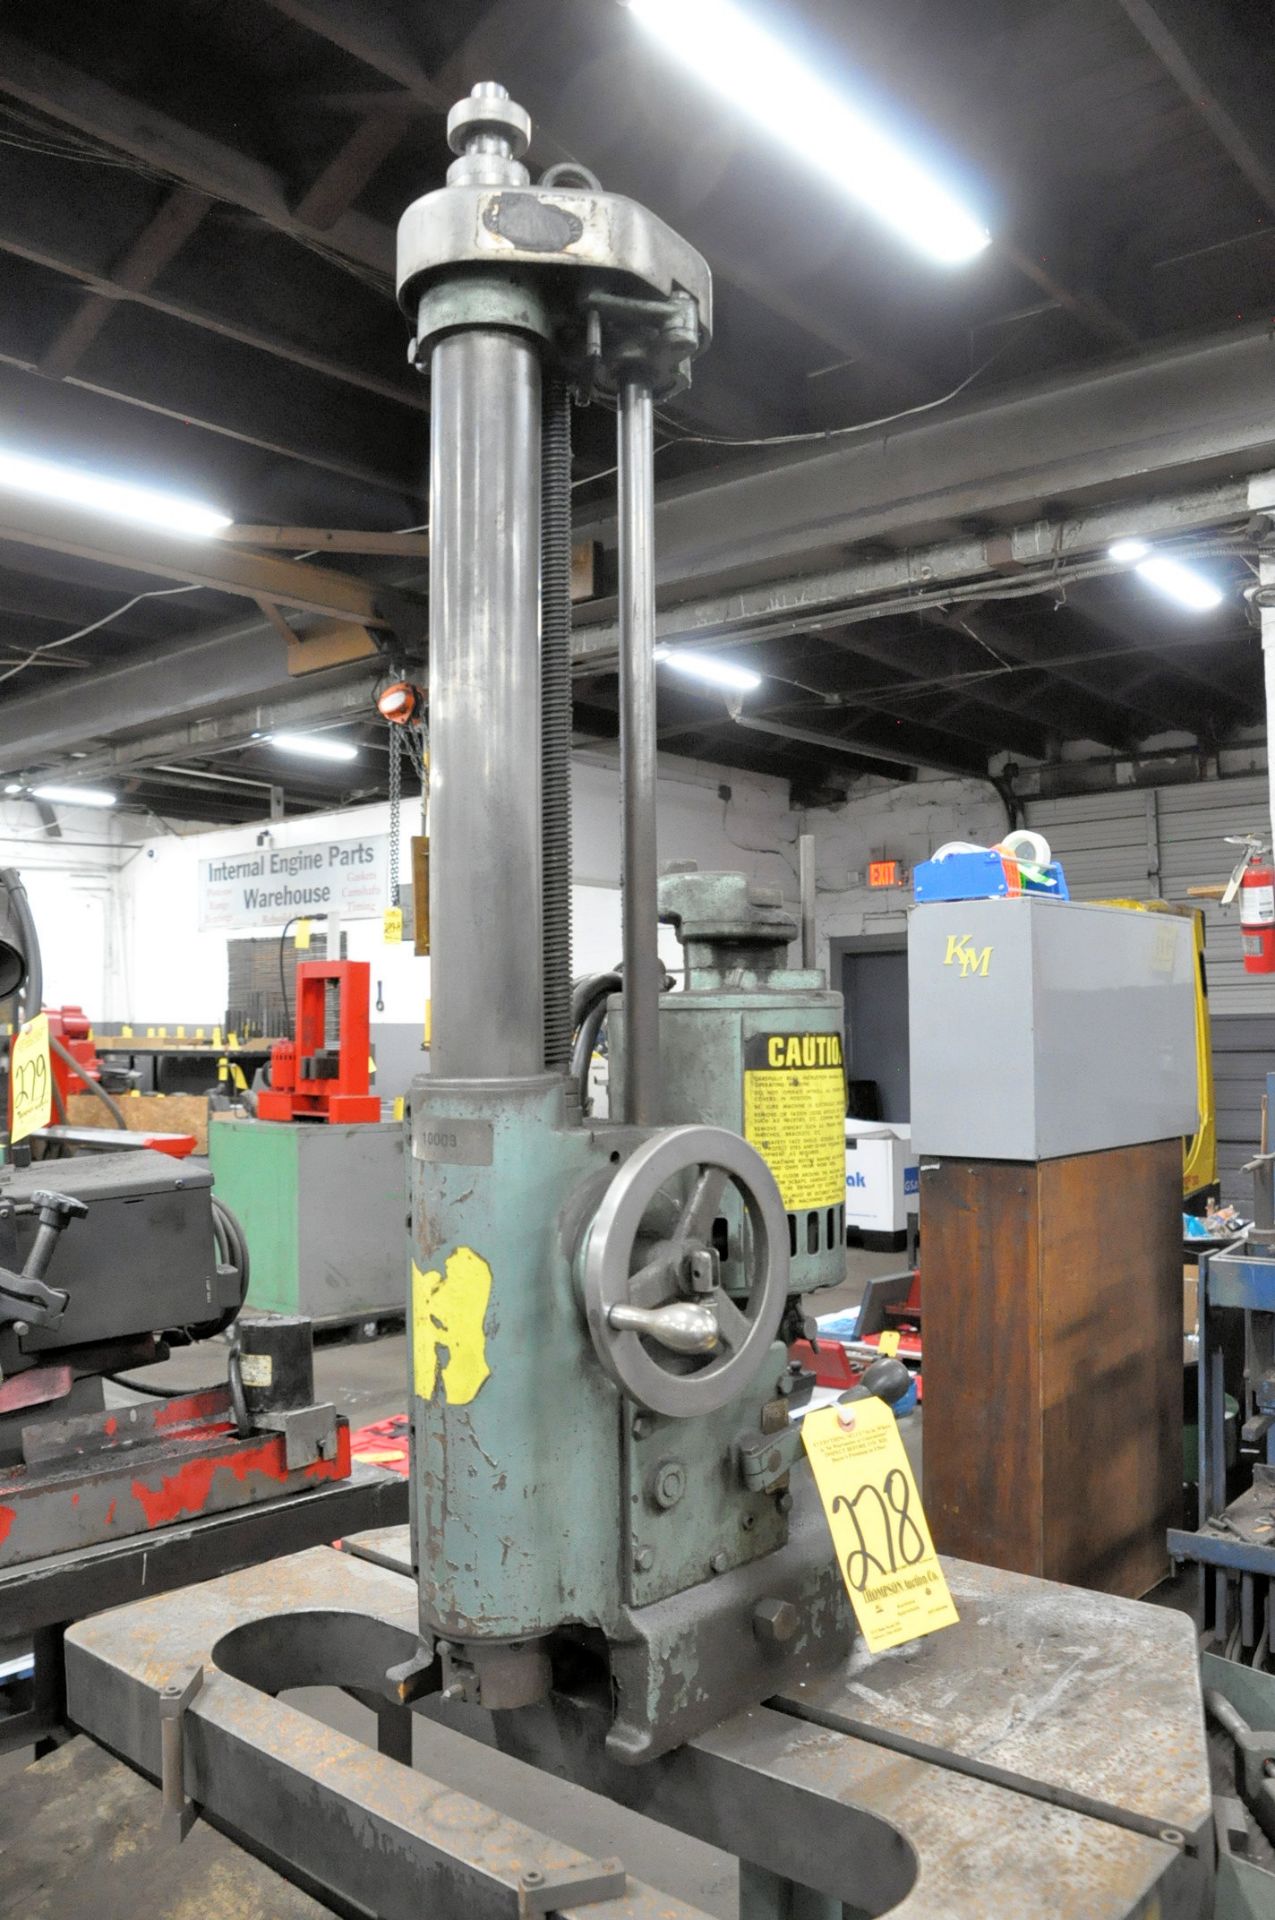 No Name 250-Lbs. Capacity Vertical Cylinder Boring Machine, S/n N/a, with Tooling and Stand - Image 3 of 5